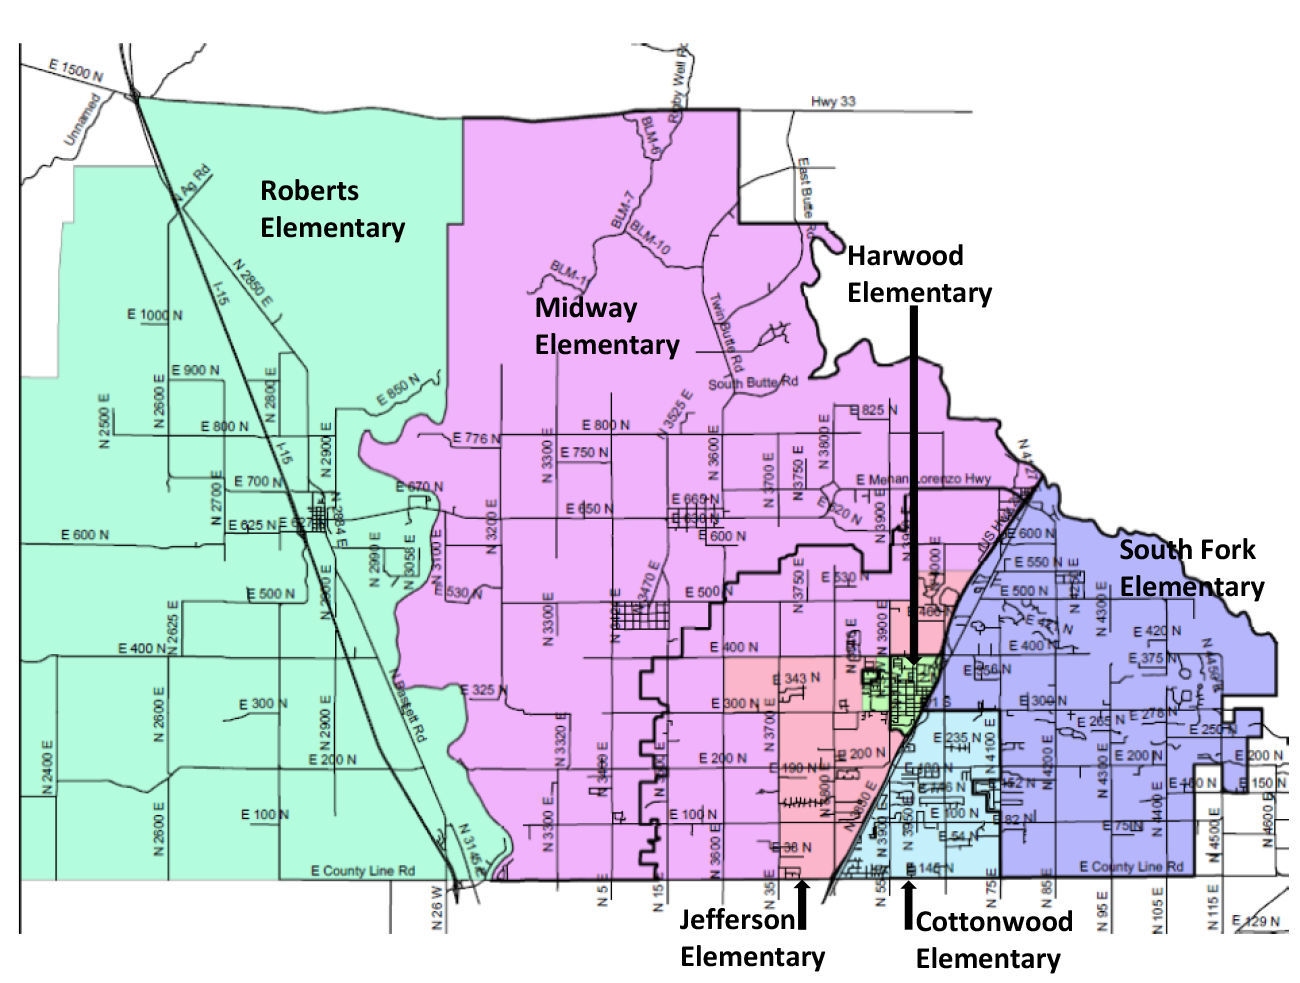 freehold township high school district boundary